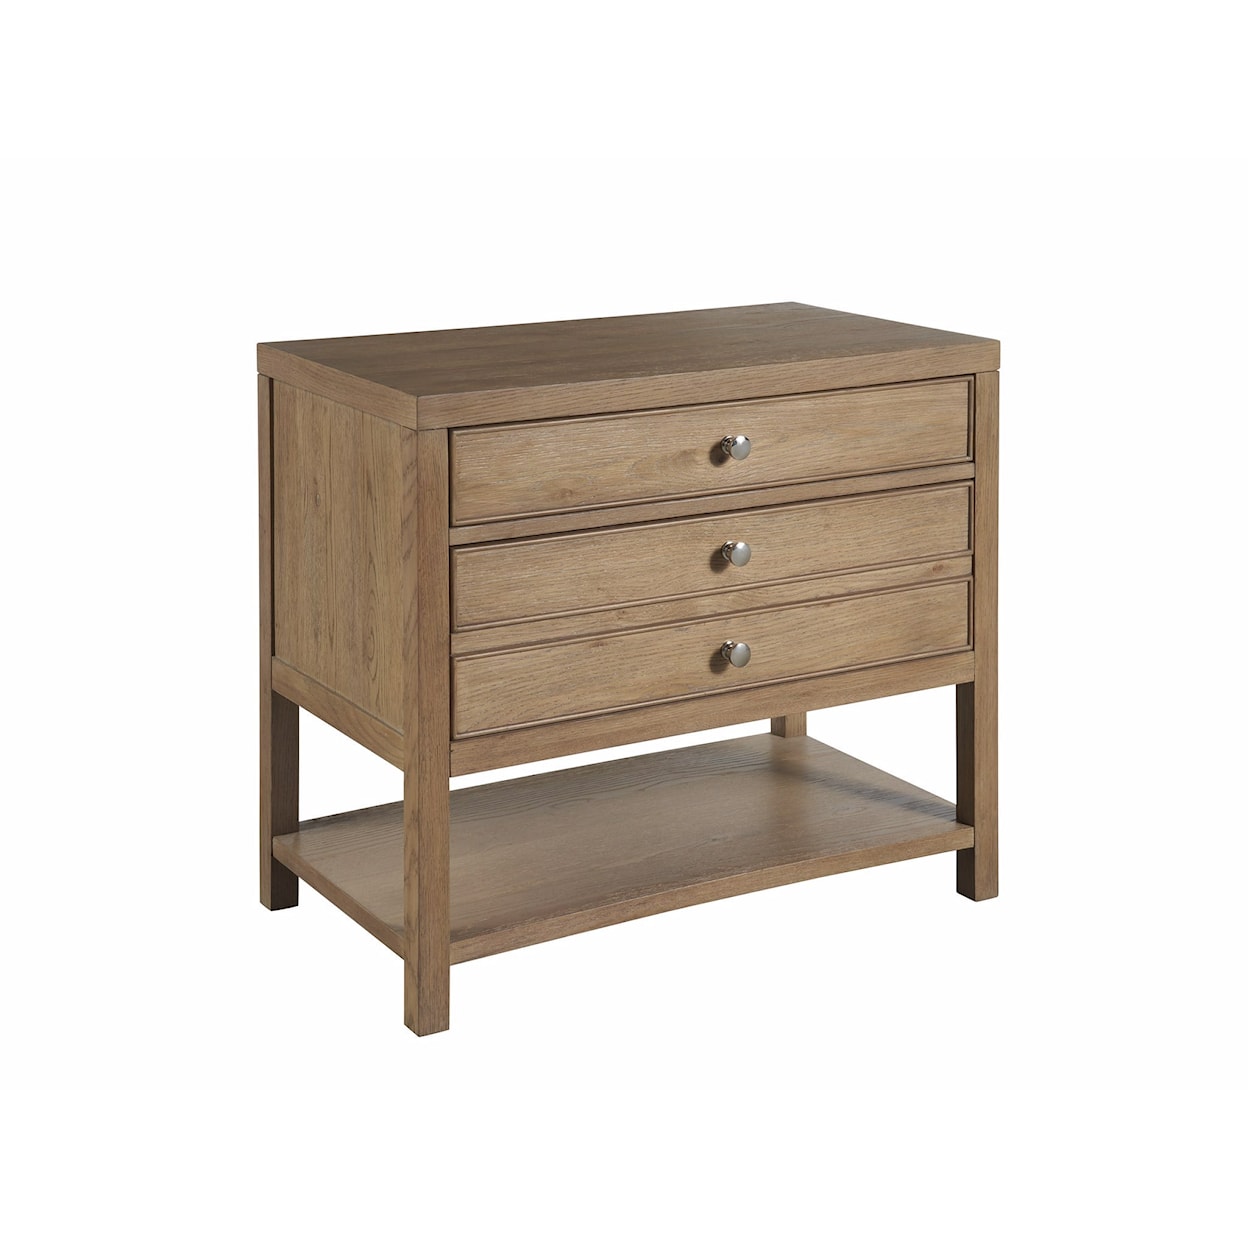 Universal Weekender Coastal Living Home Collection 3-Drawer Nightstand